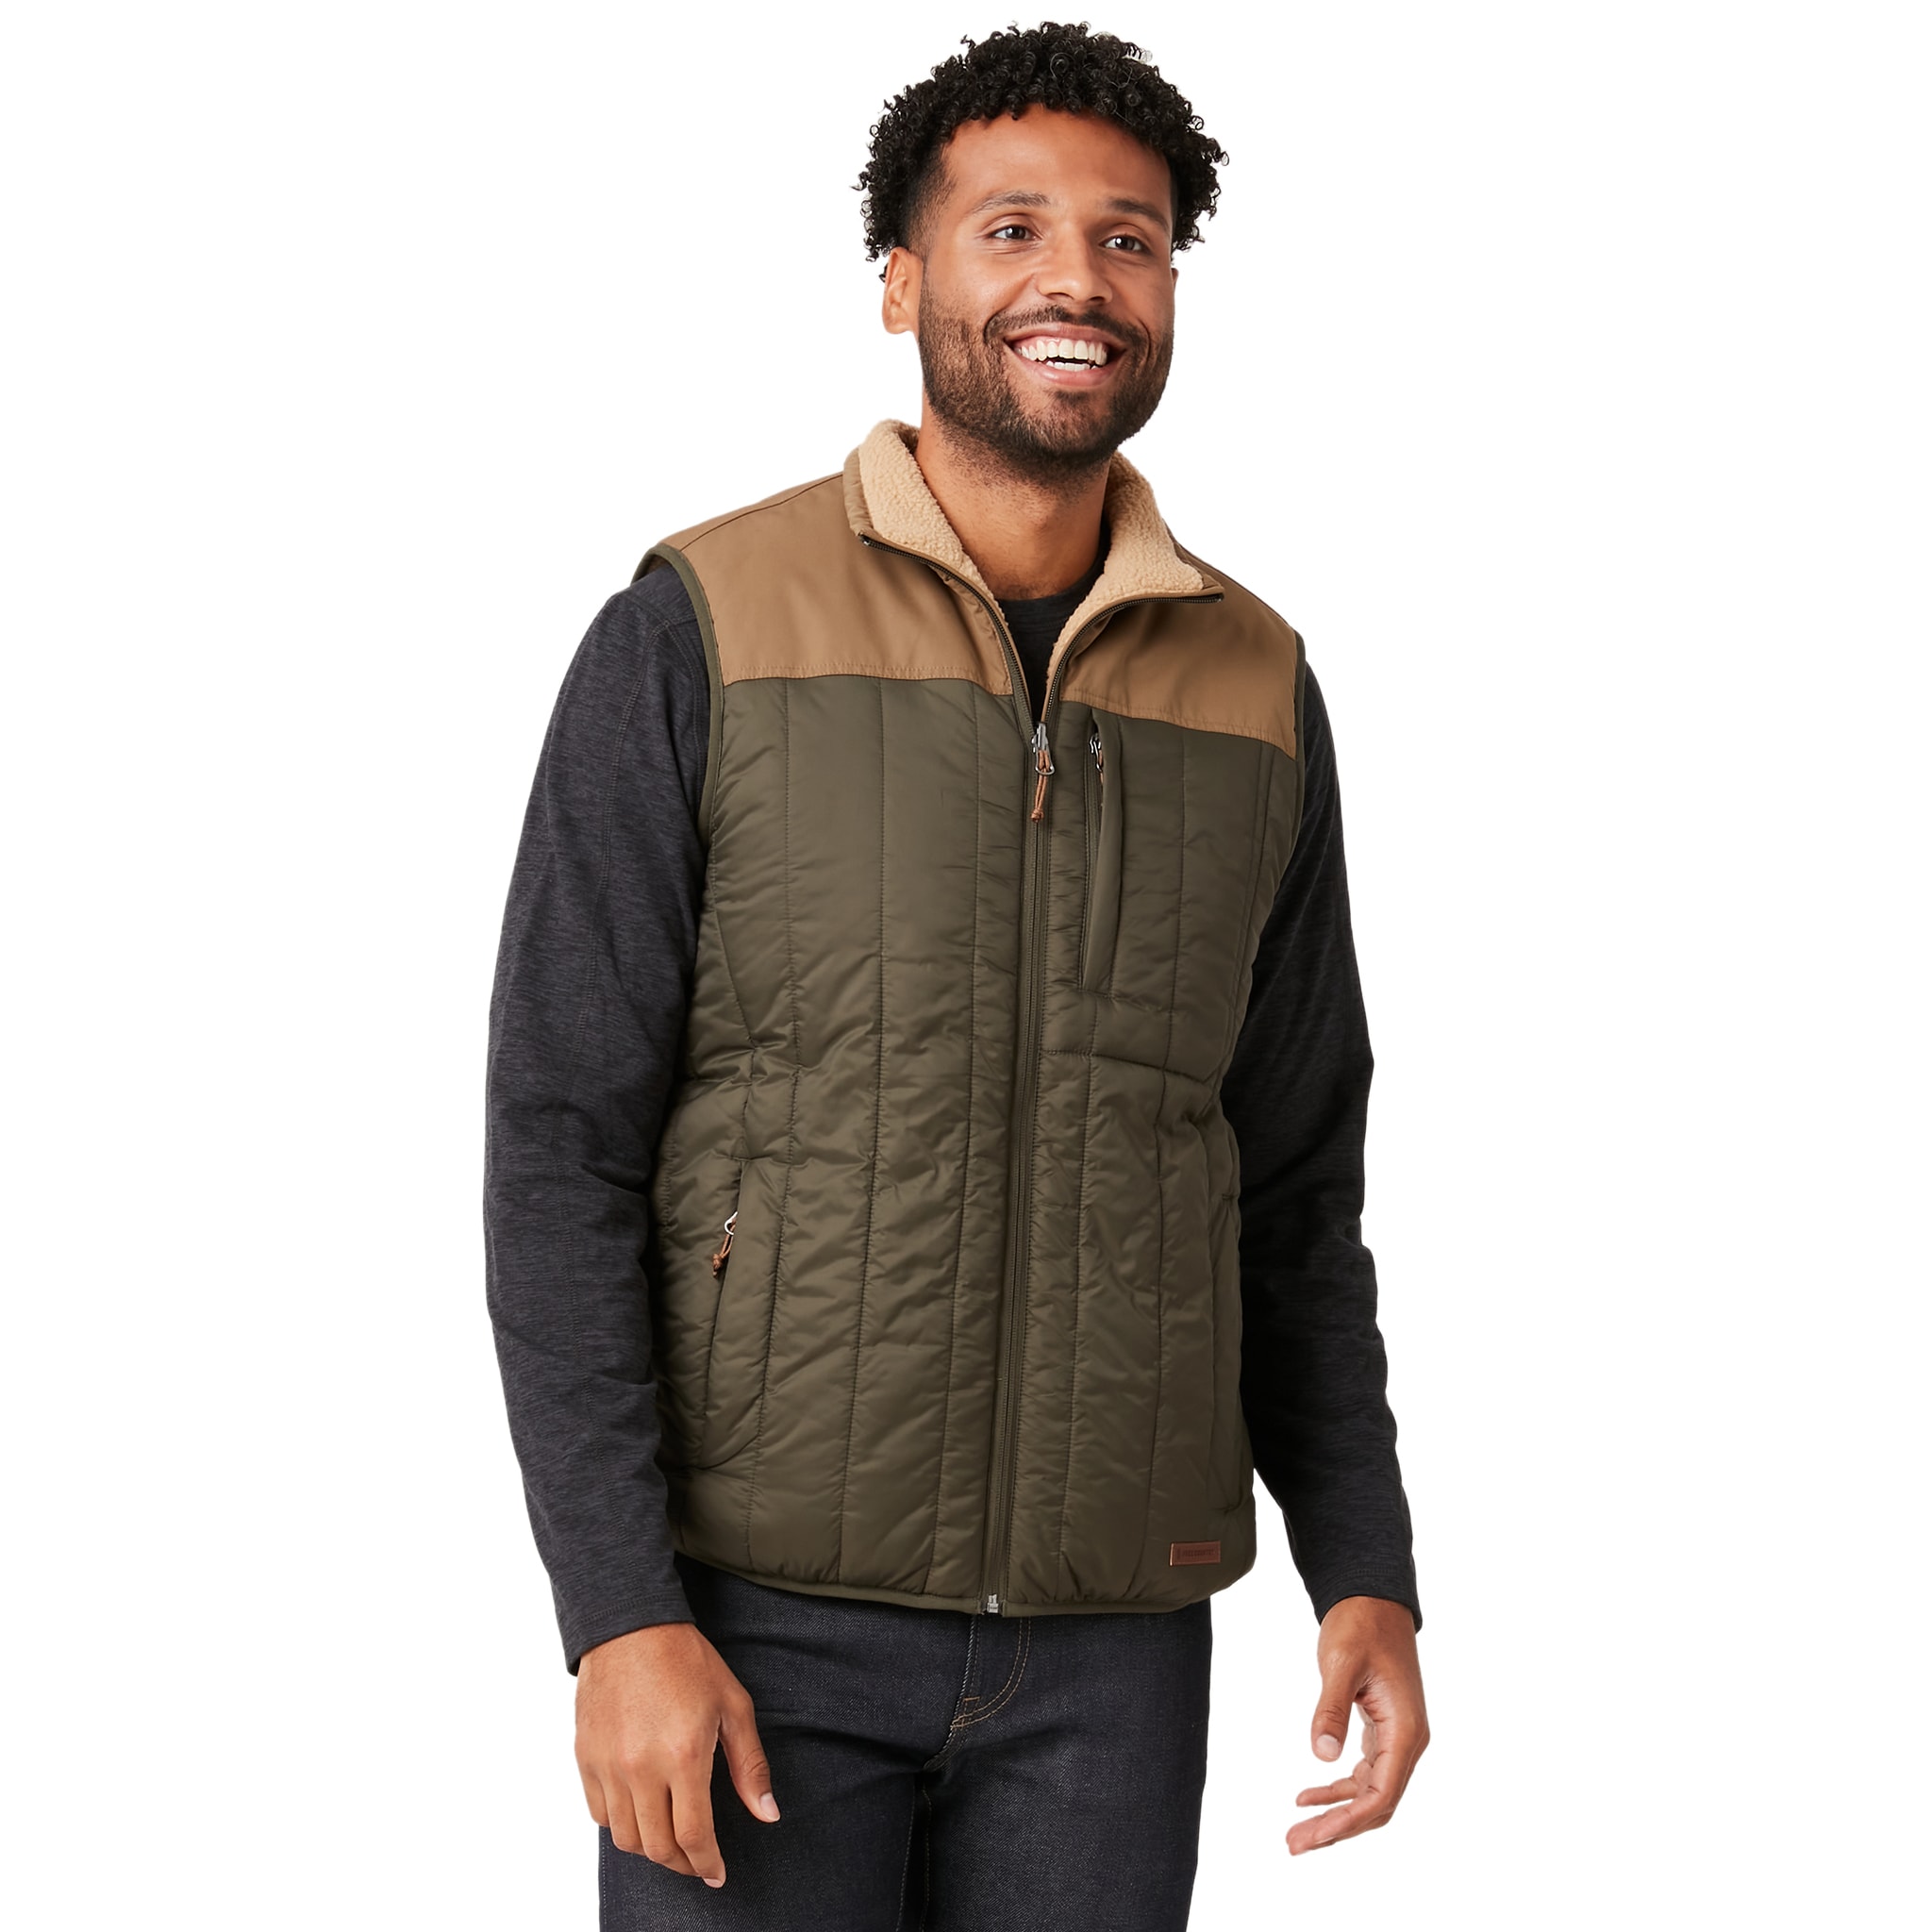 Free Country Men's Multi Polyester Hooded Vest (Large) the Work Jackets & Coats department at Lowes.com